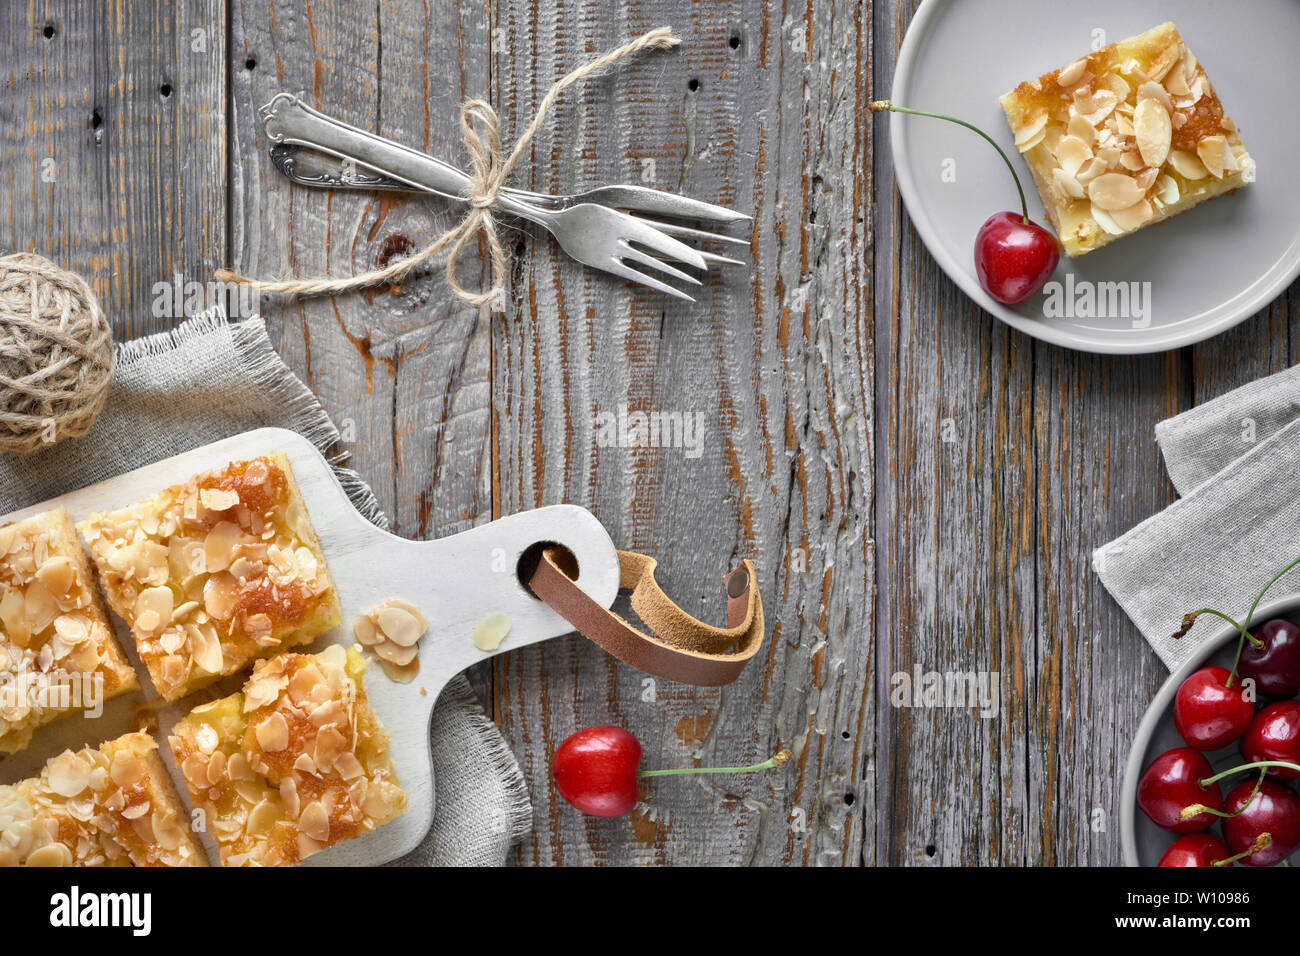 Almond cake cut into portions on a serving board, flat lay on rustic wooden table Stock Photo